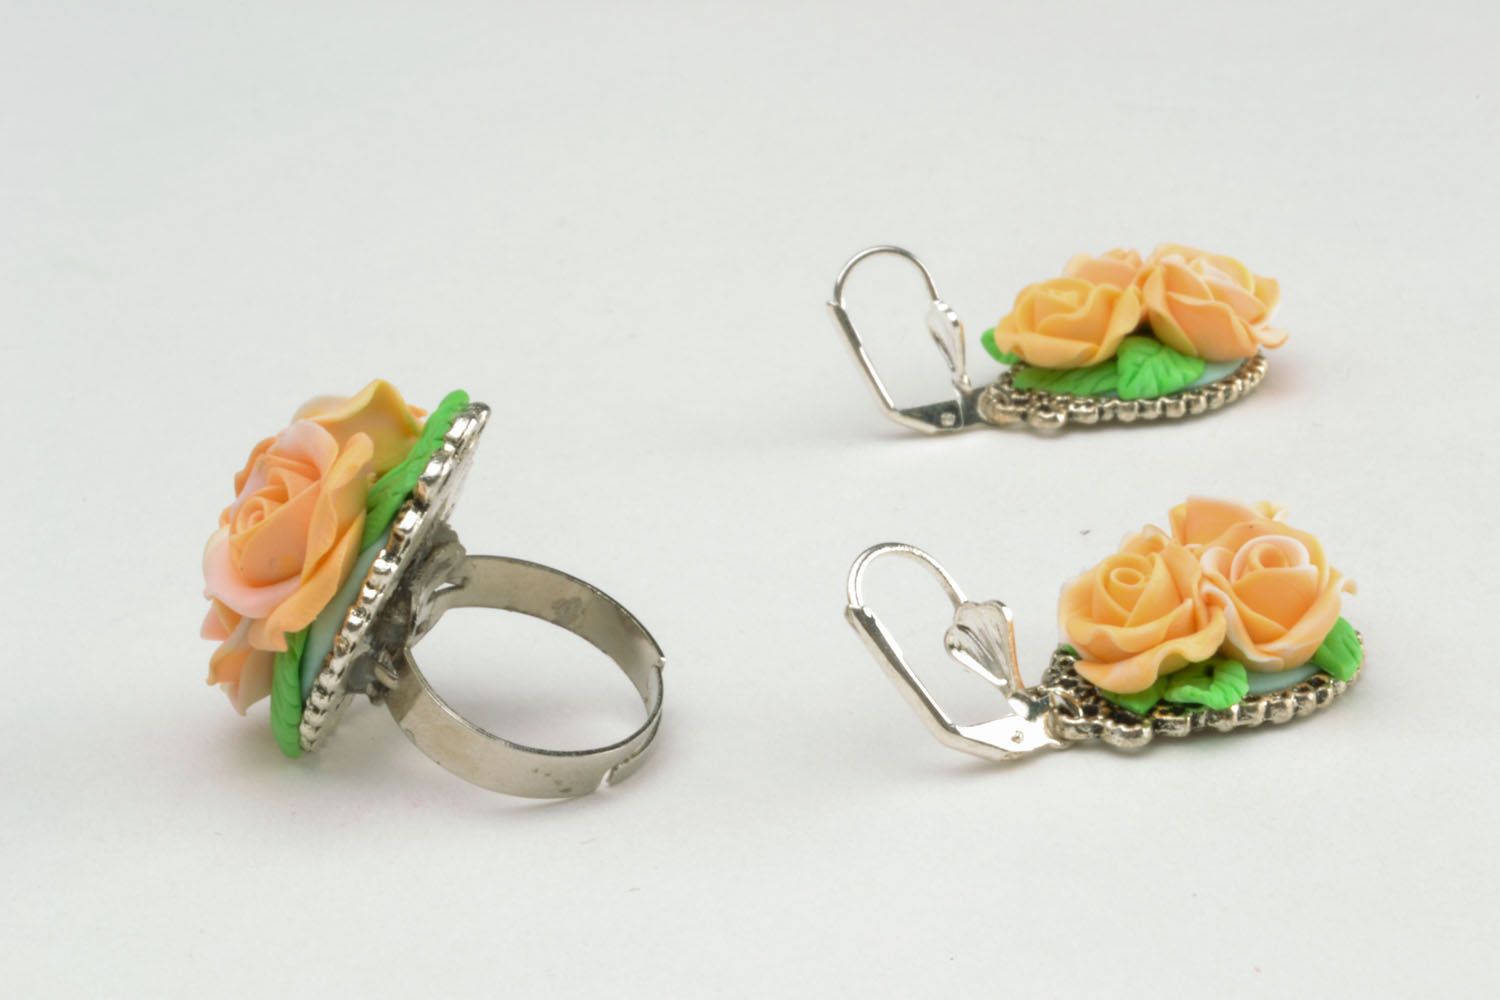 Homemade ring and earrings photo 4